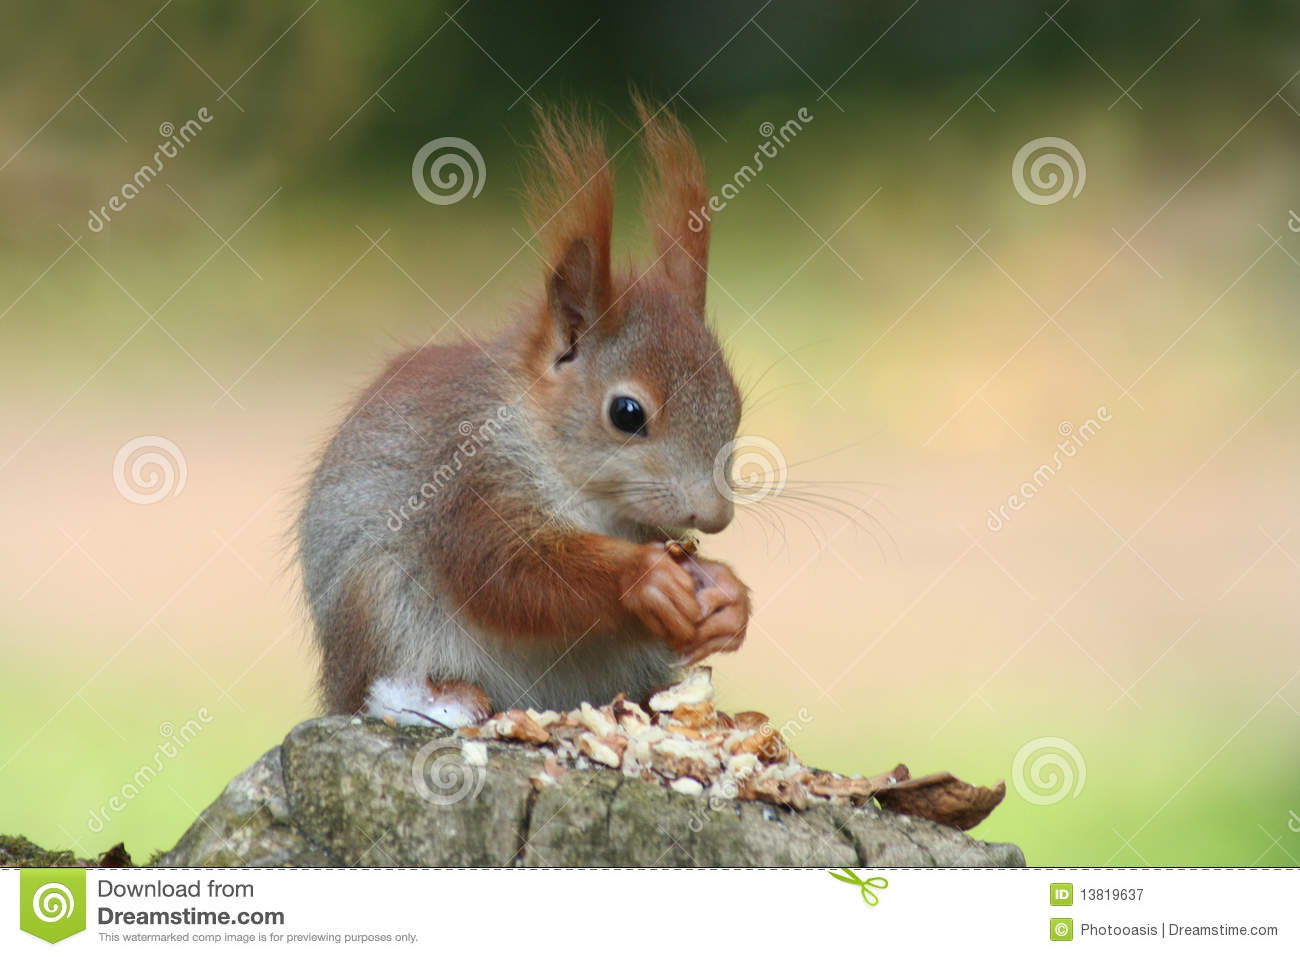 Baby Squirrels Royalty Free Stock Photography   Image  13819637